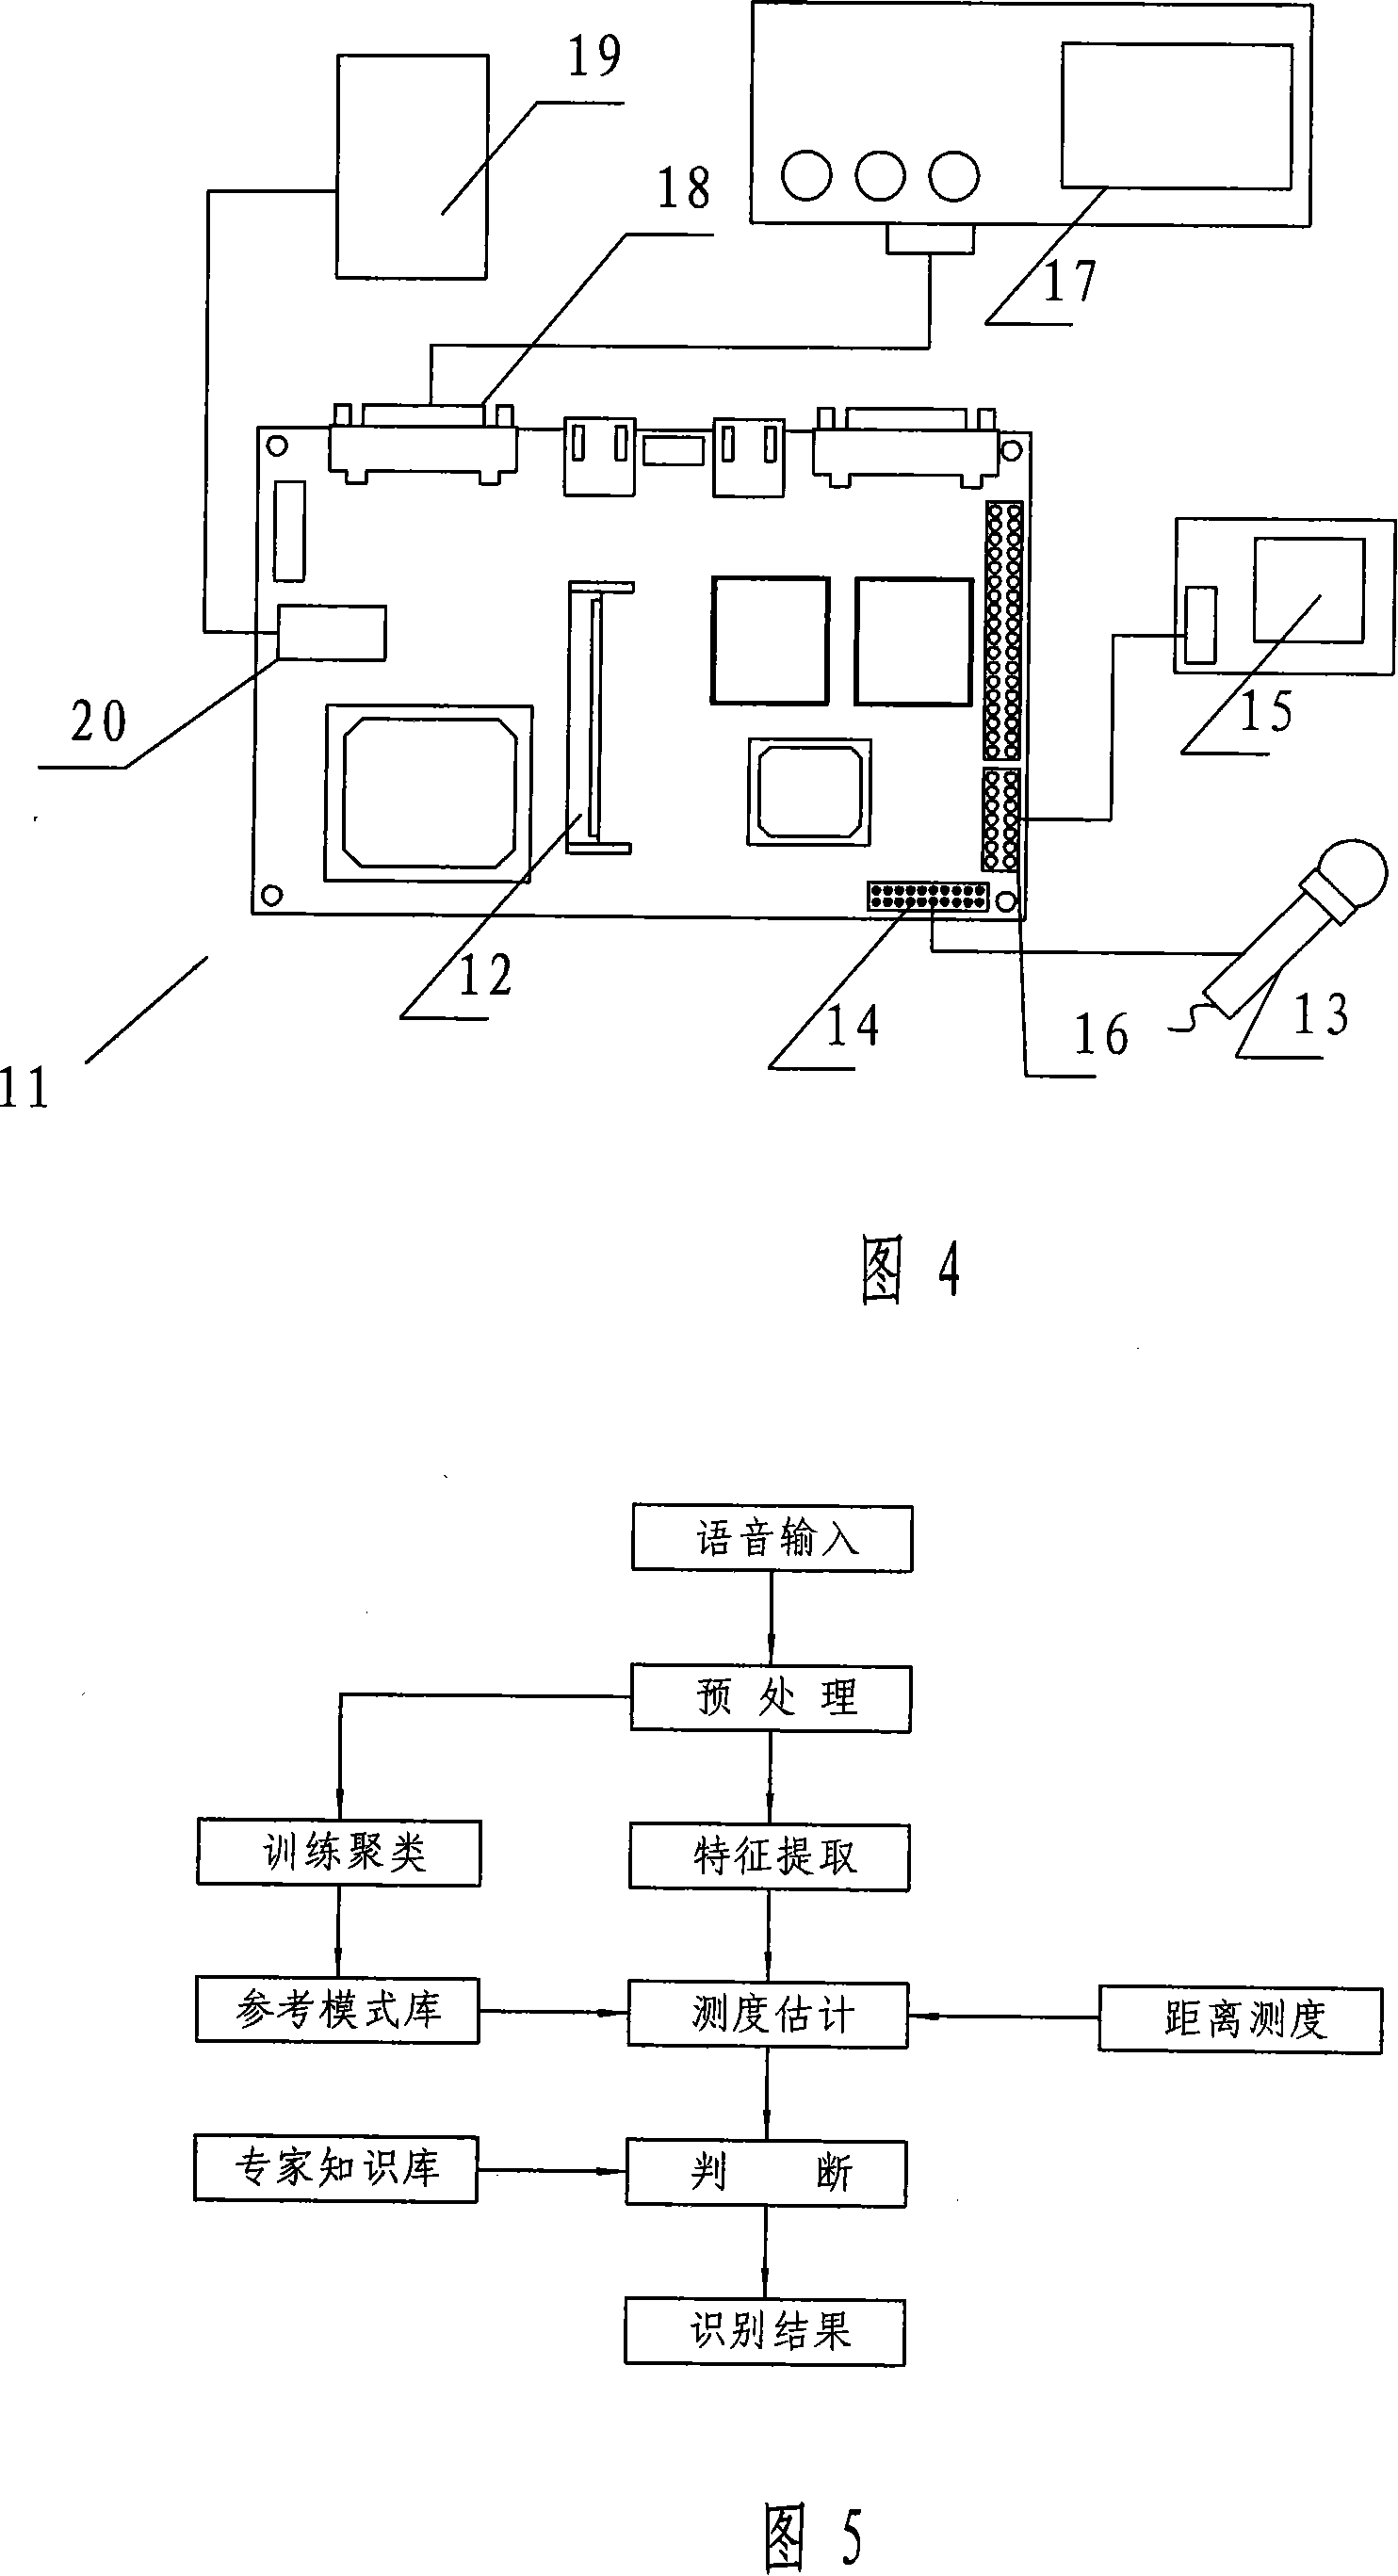 Self modulation radio broadcast terminal system and its monitoring processor